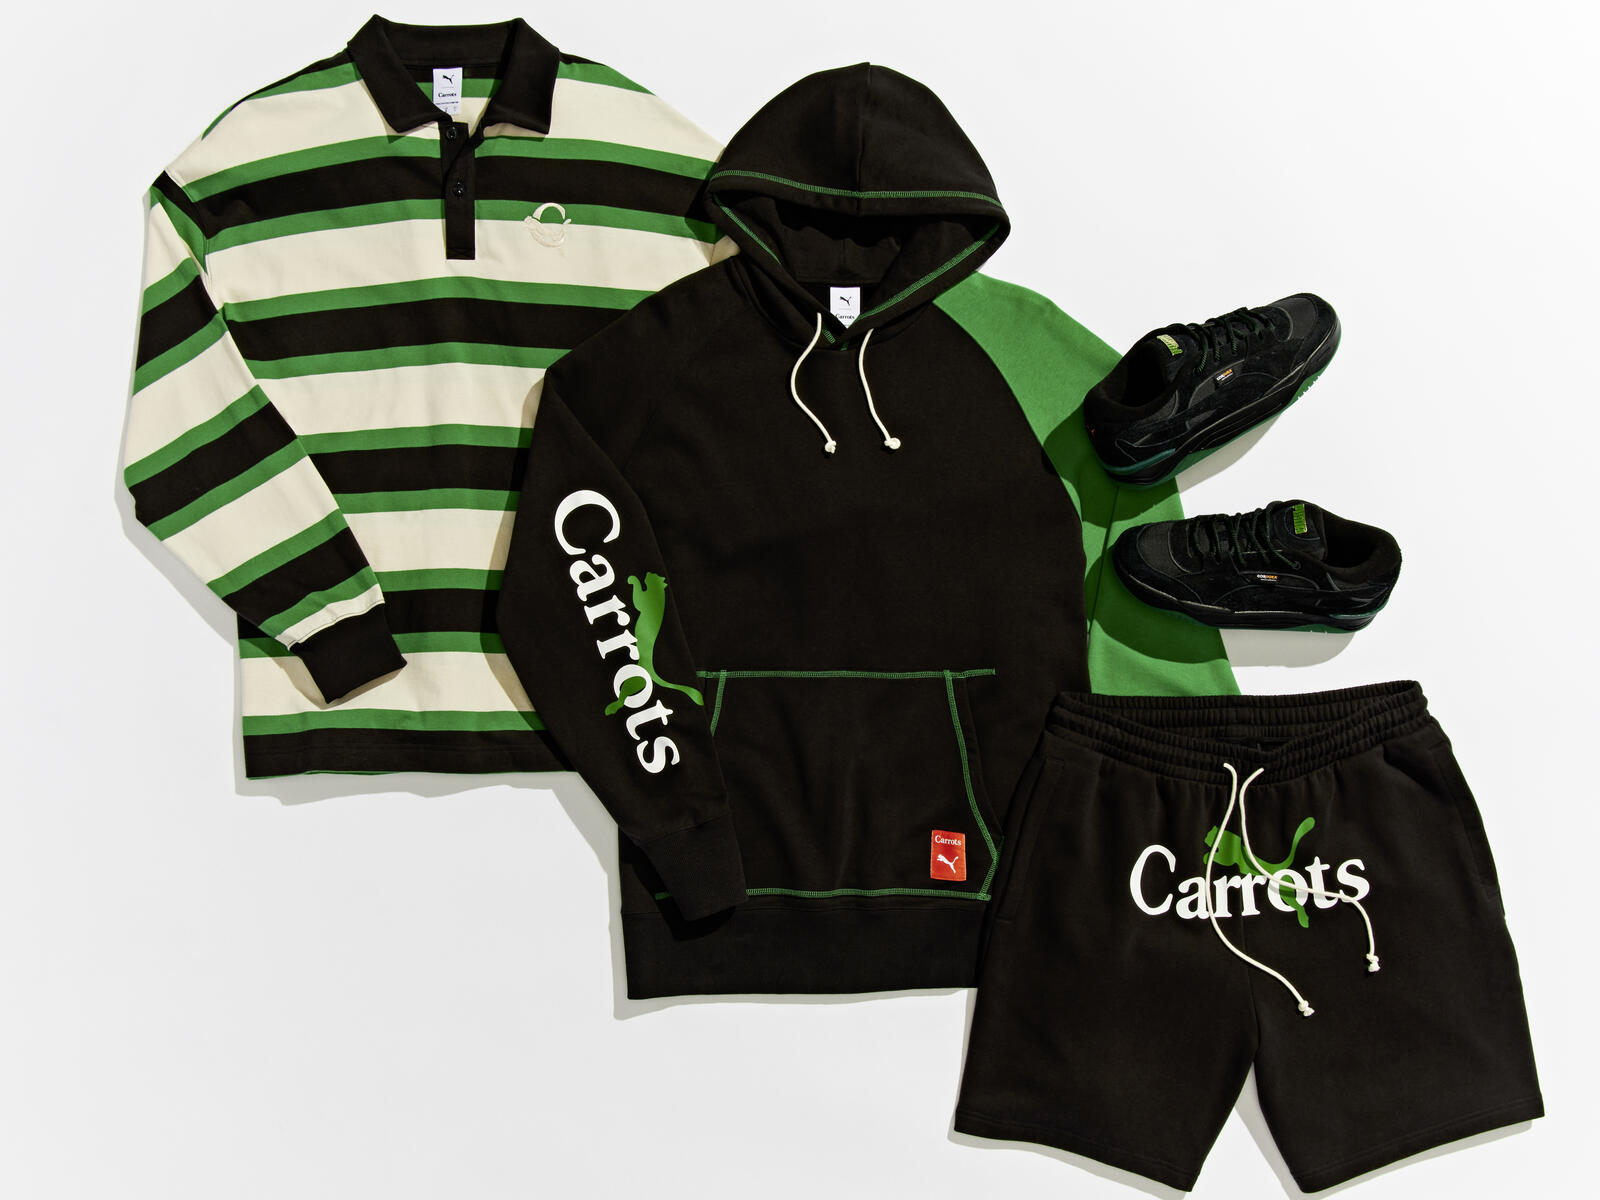 Products from the PUMA Carrots Collection